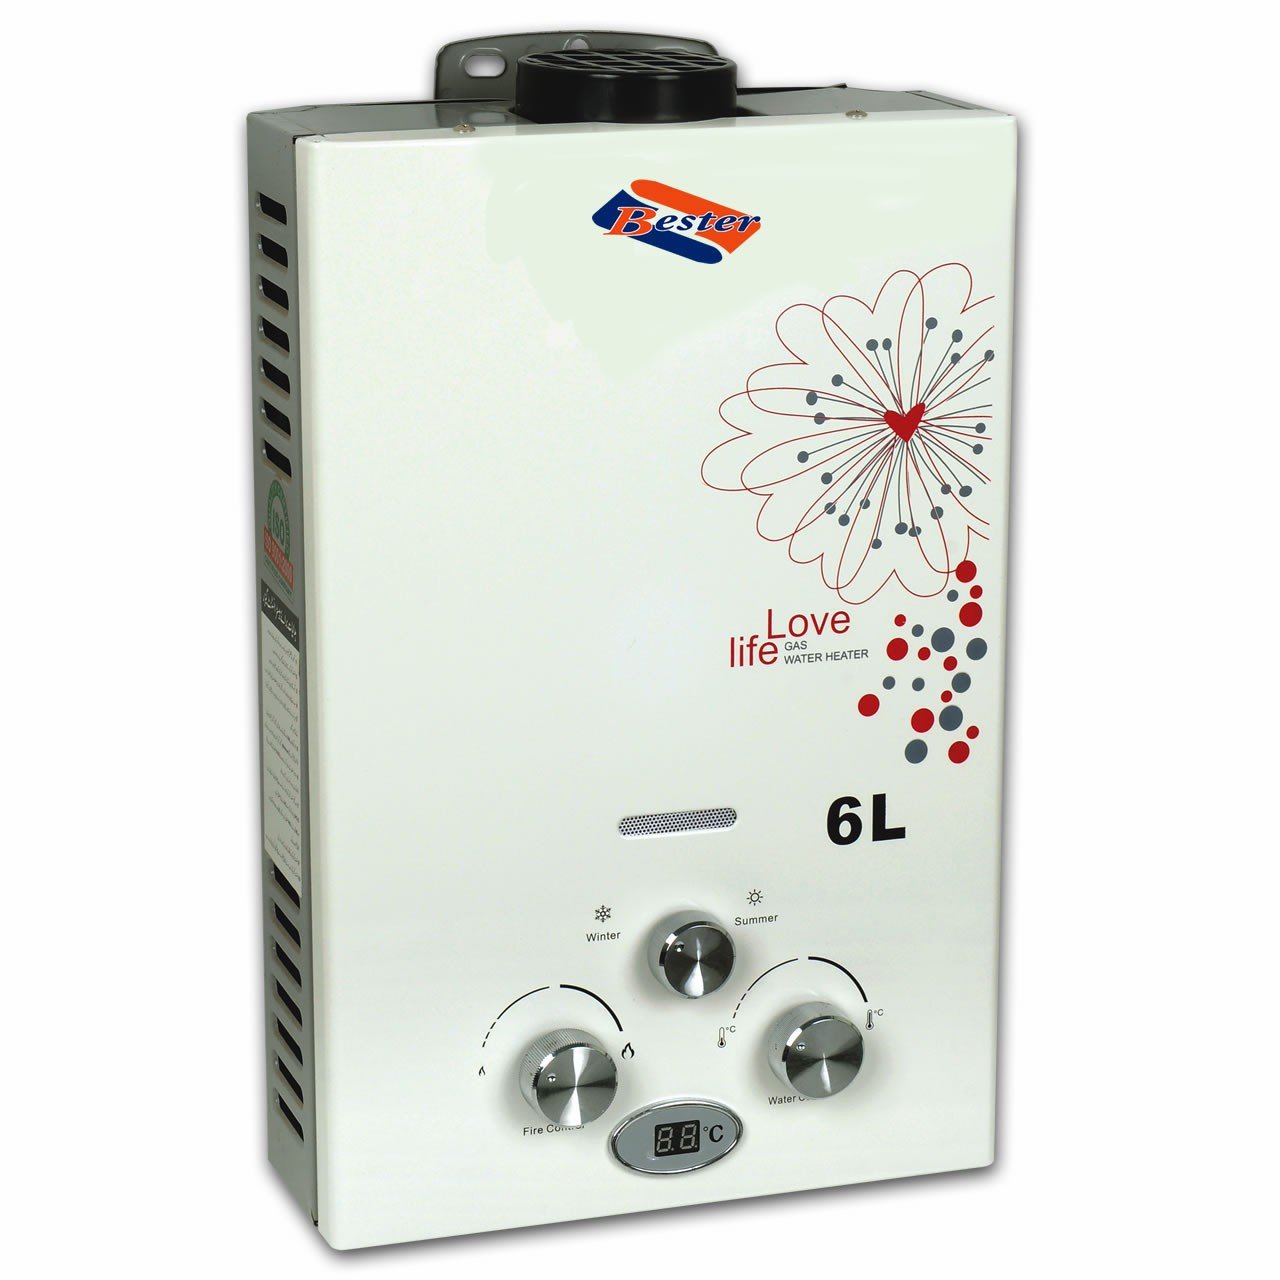 Bester Instant Gas Geysers P-2